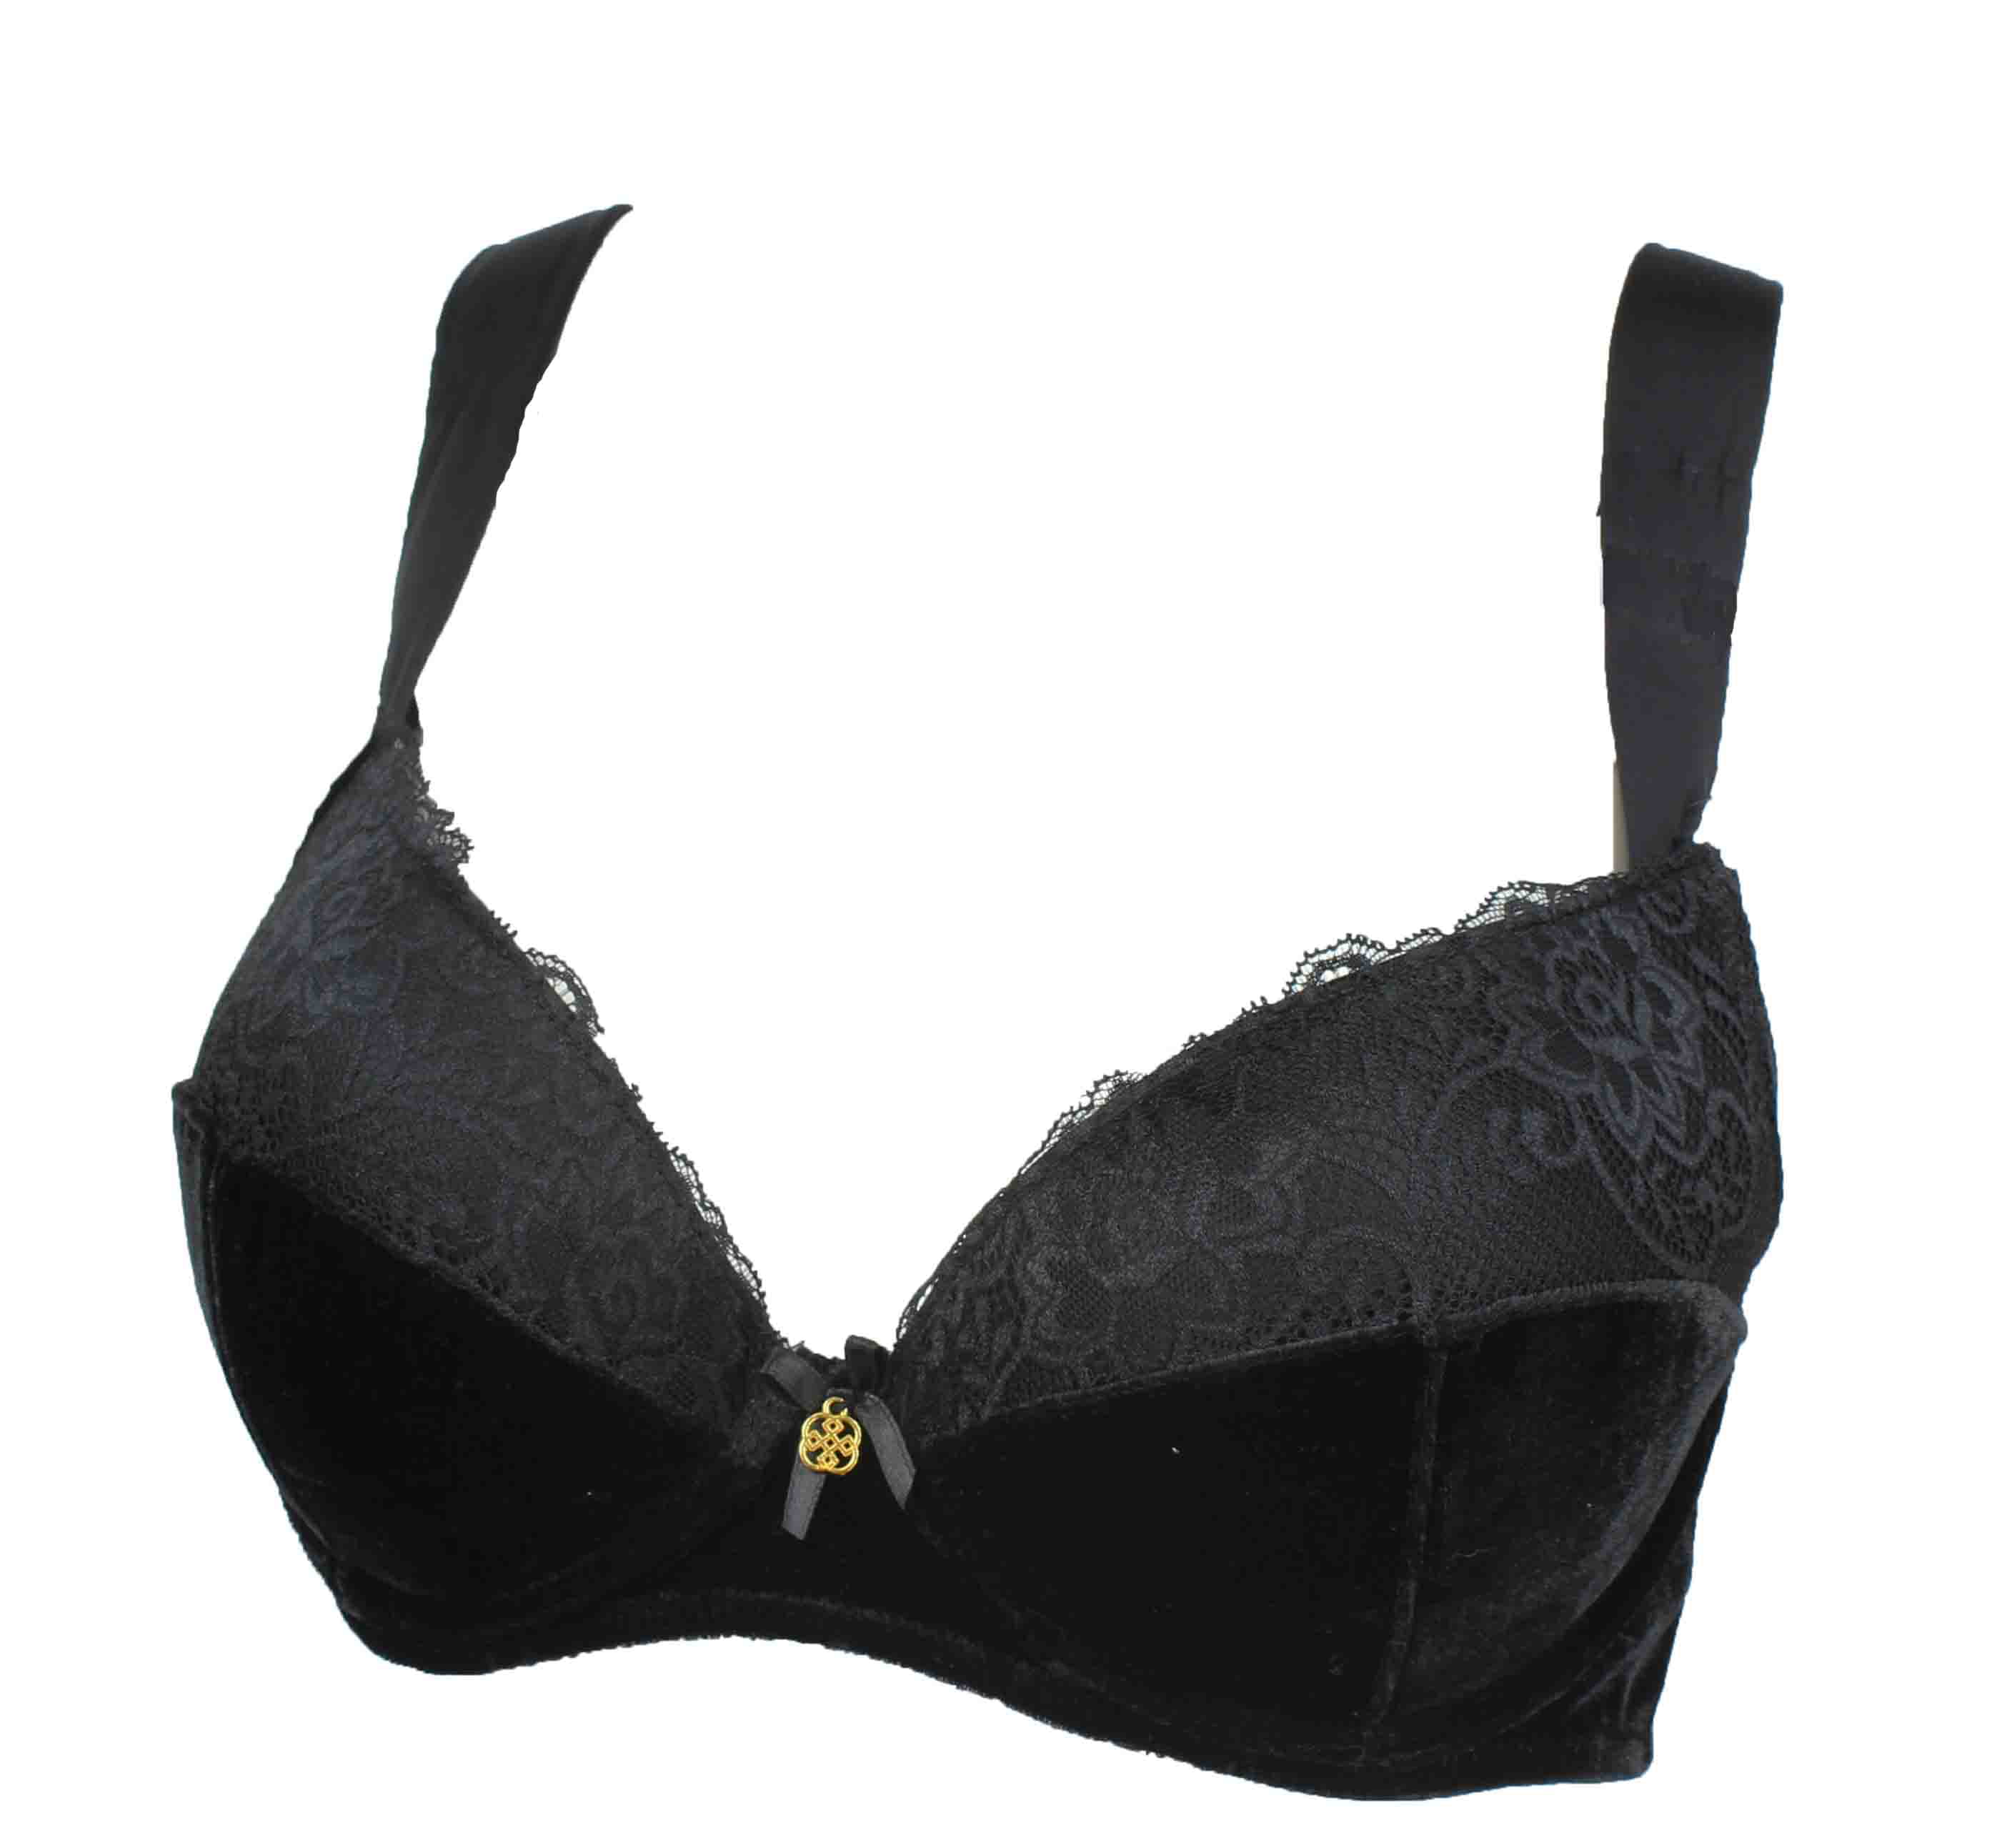 Best Nwt Black And Pink Daisy Fuentes Push Up Bra 34c for sale in